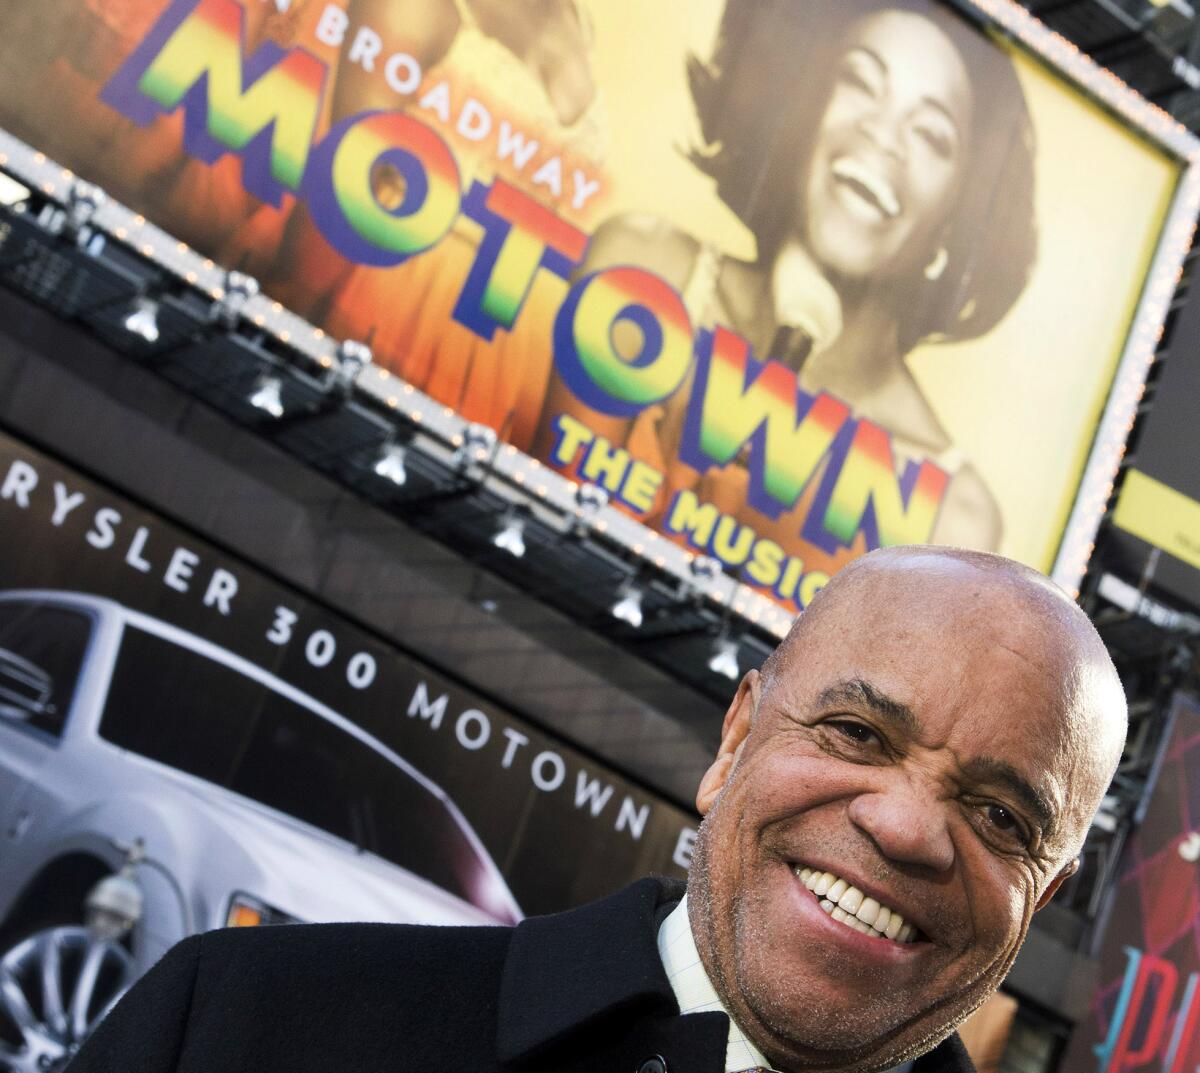 Motown founder Berry Gordy at the Lunt-Fontanne Theatre in New York, which is featuring "Motown: The Musical."